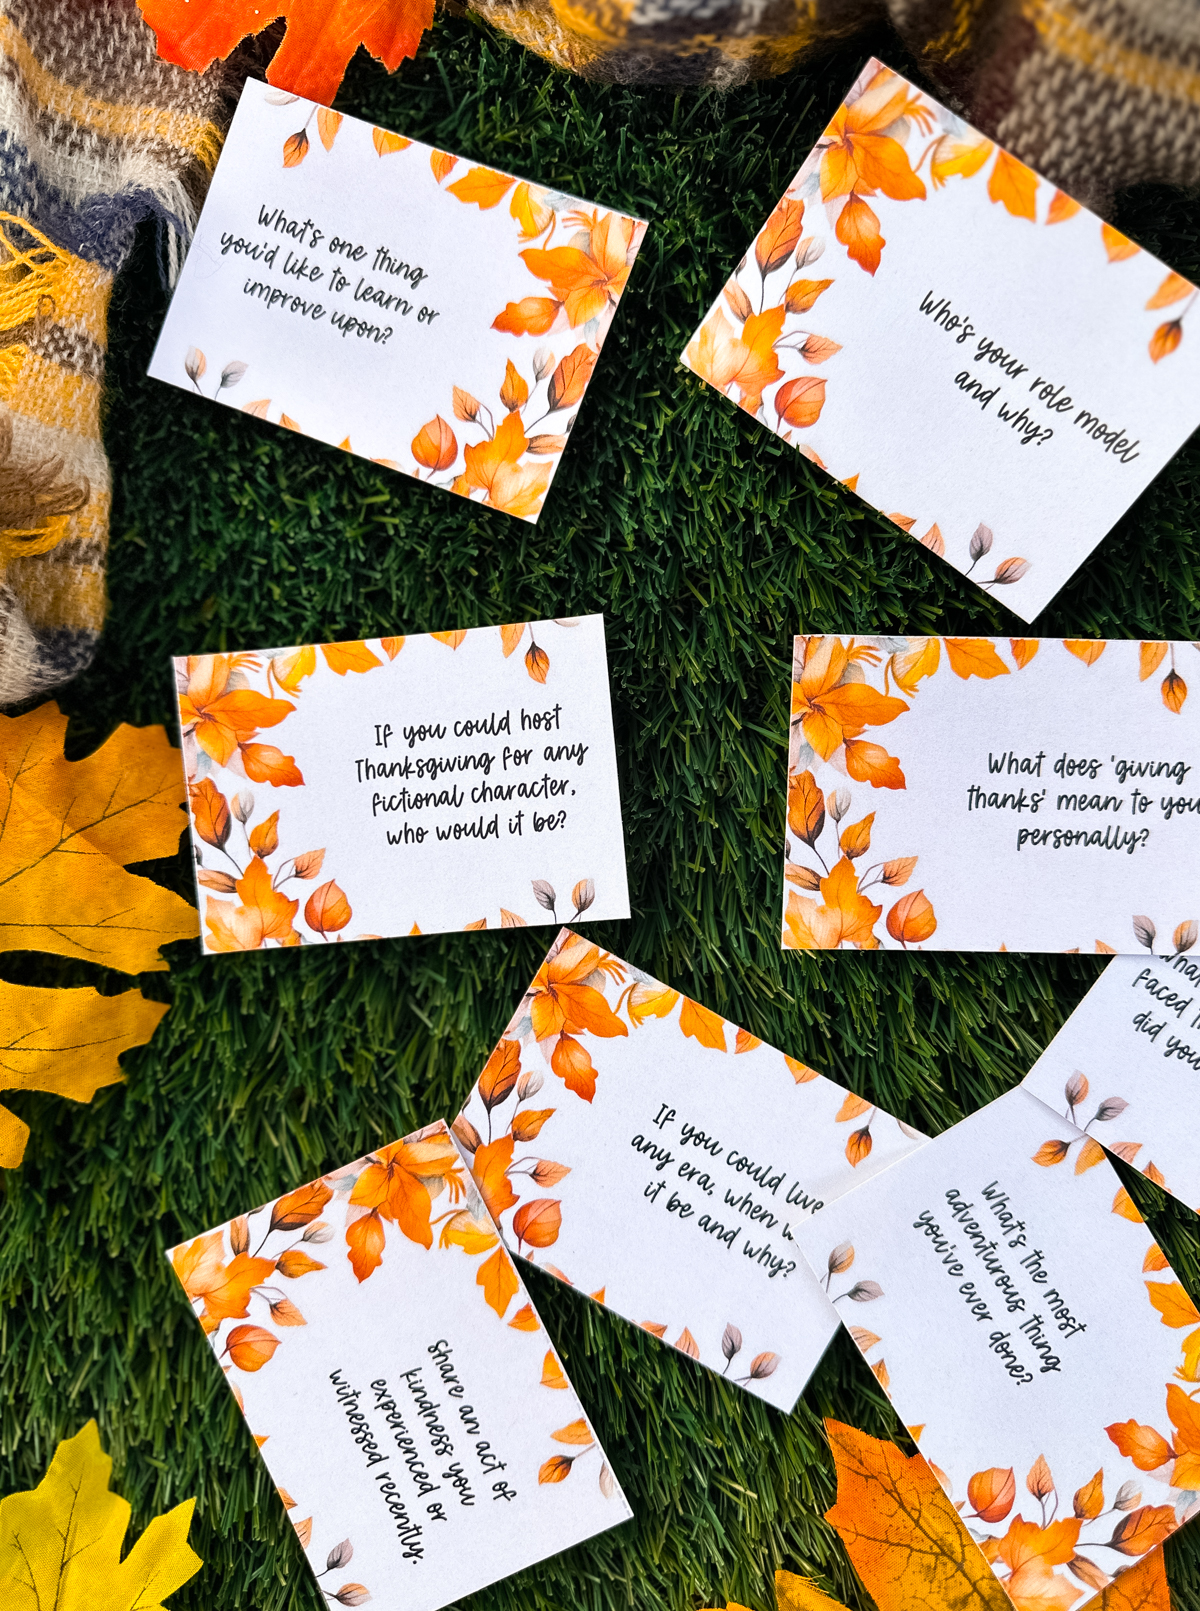 Thanksgiving: A Time for Food, Family, and Great Conversations! Enhance your gathering with our specially crafted conversation starters that everyone will love.